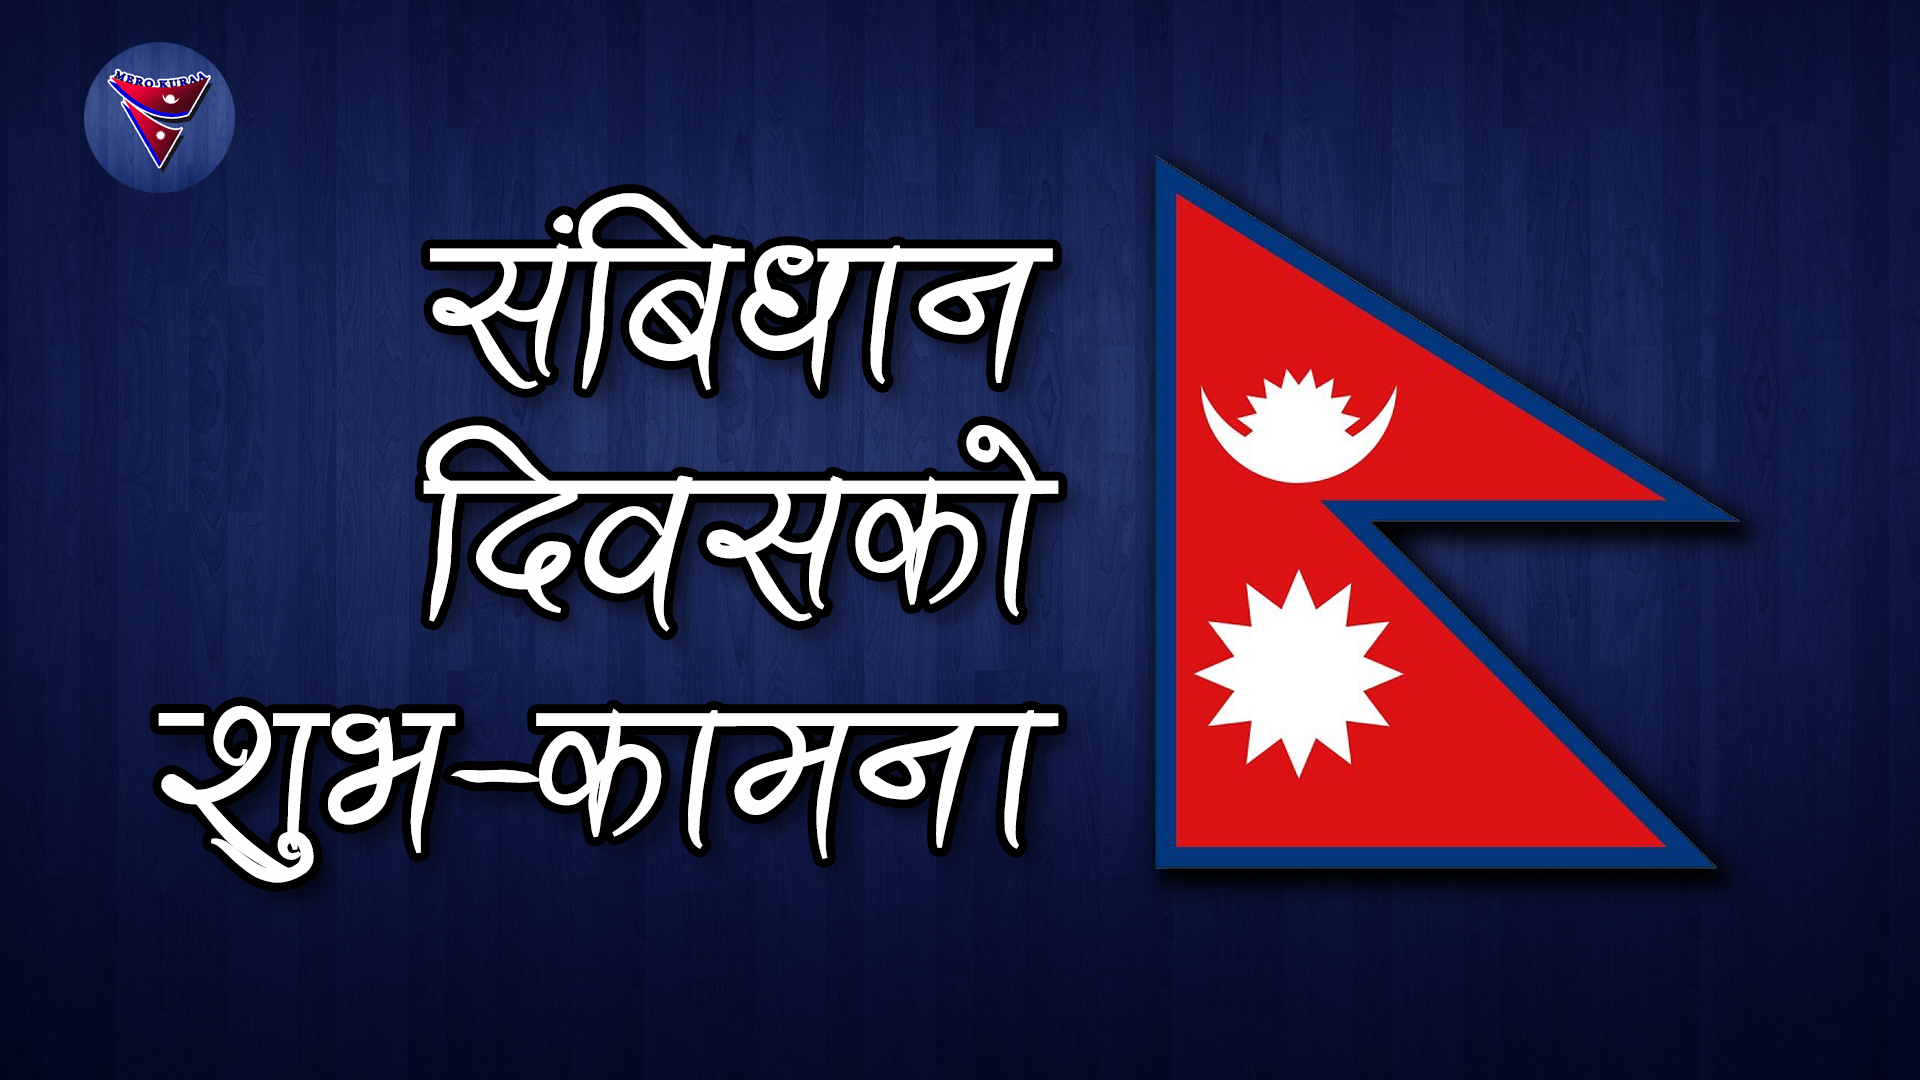 essay on constitution day in nepali